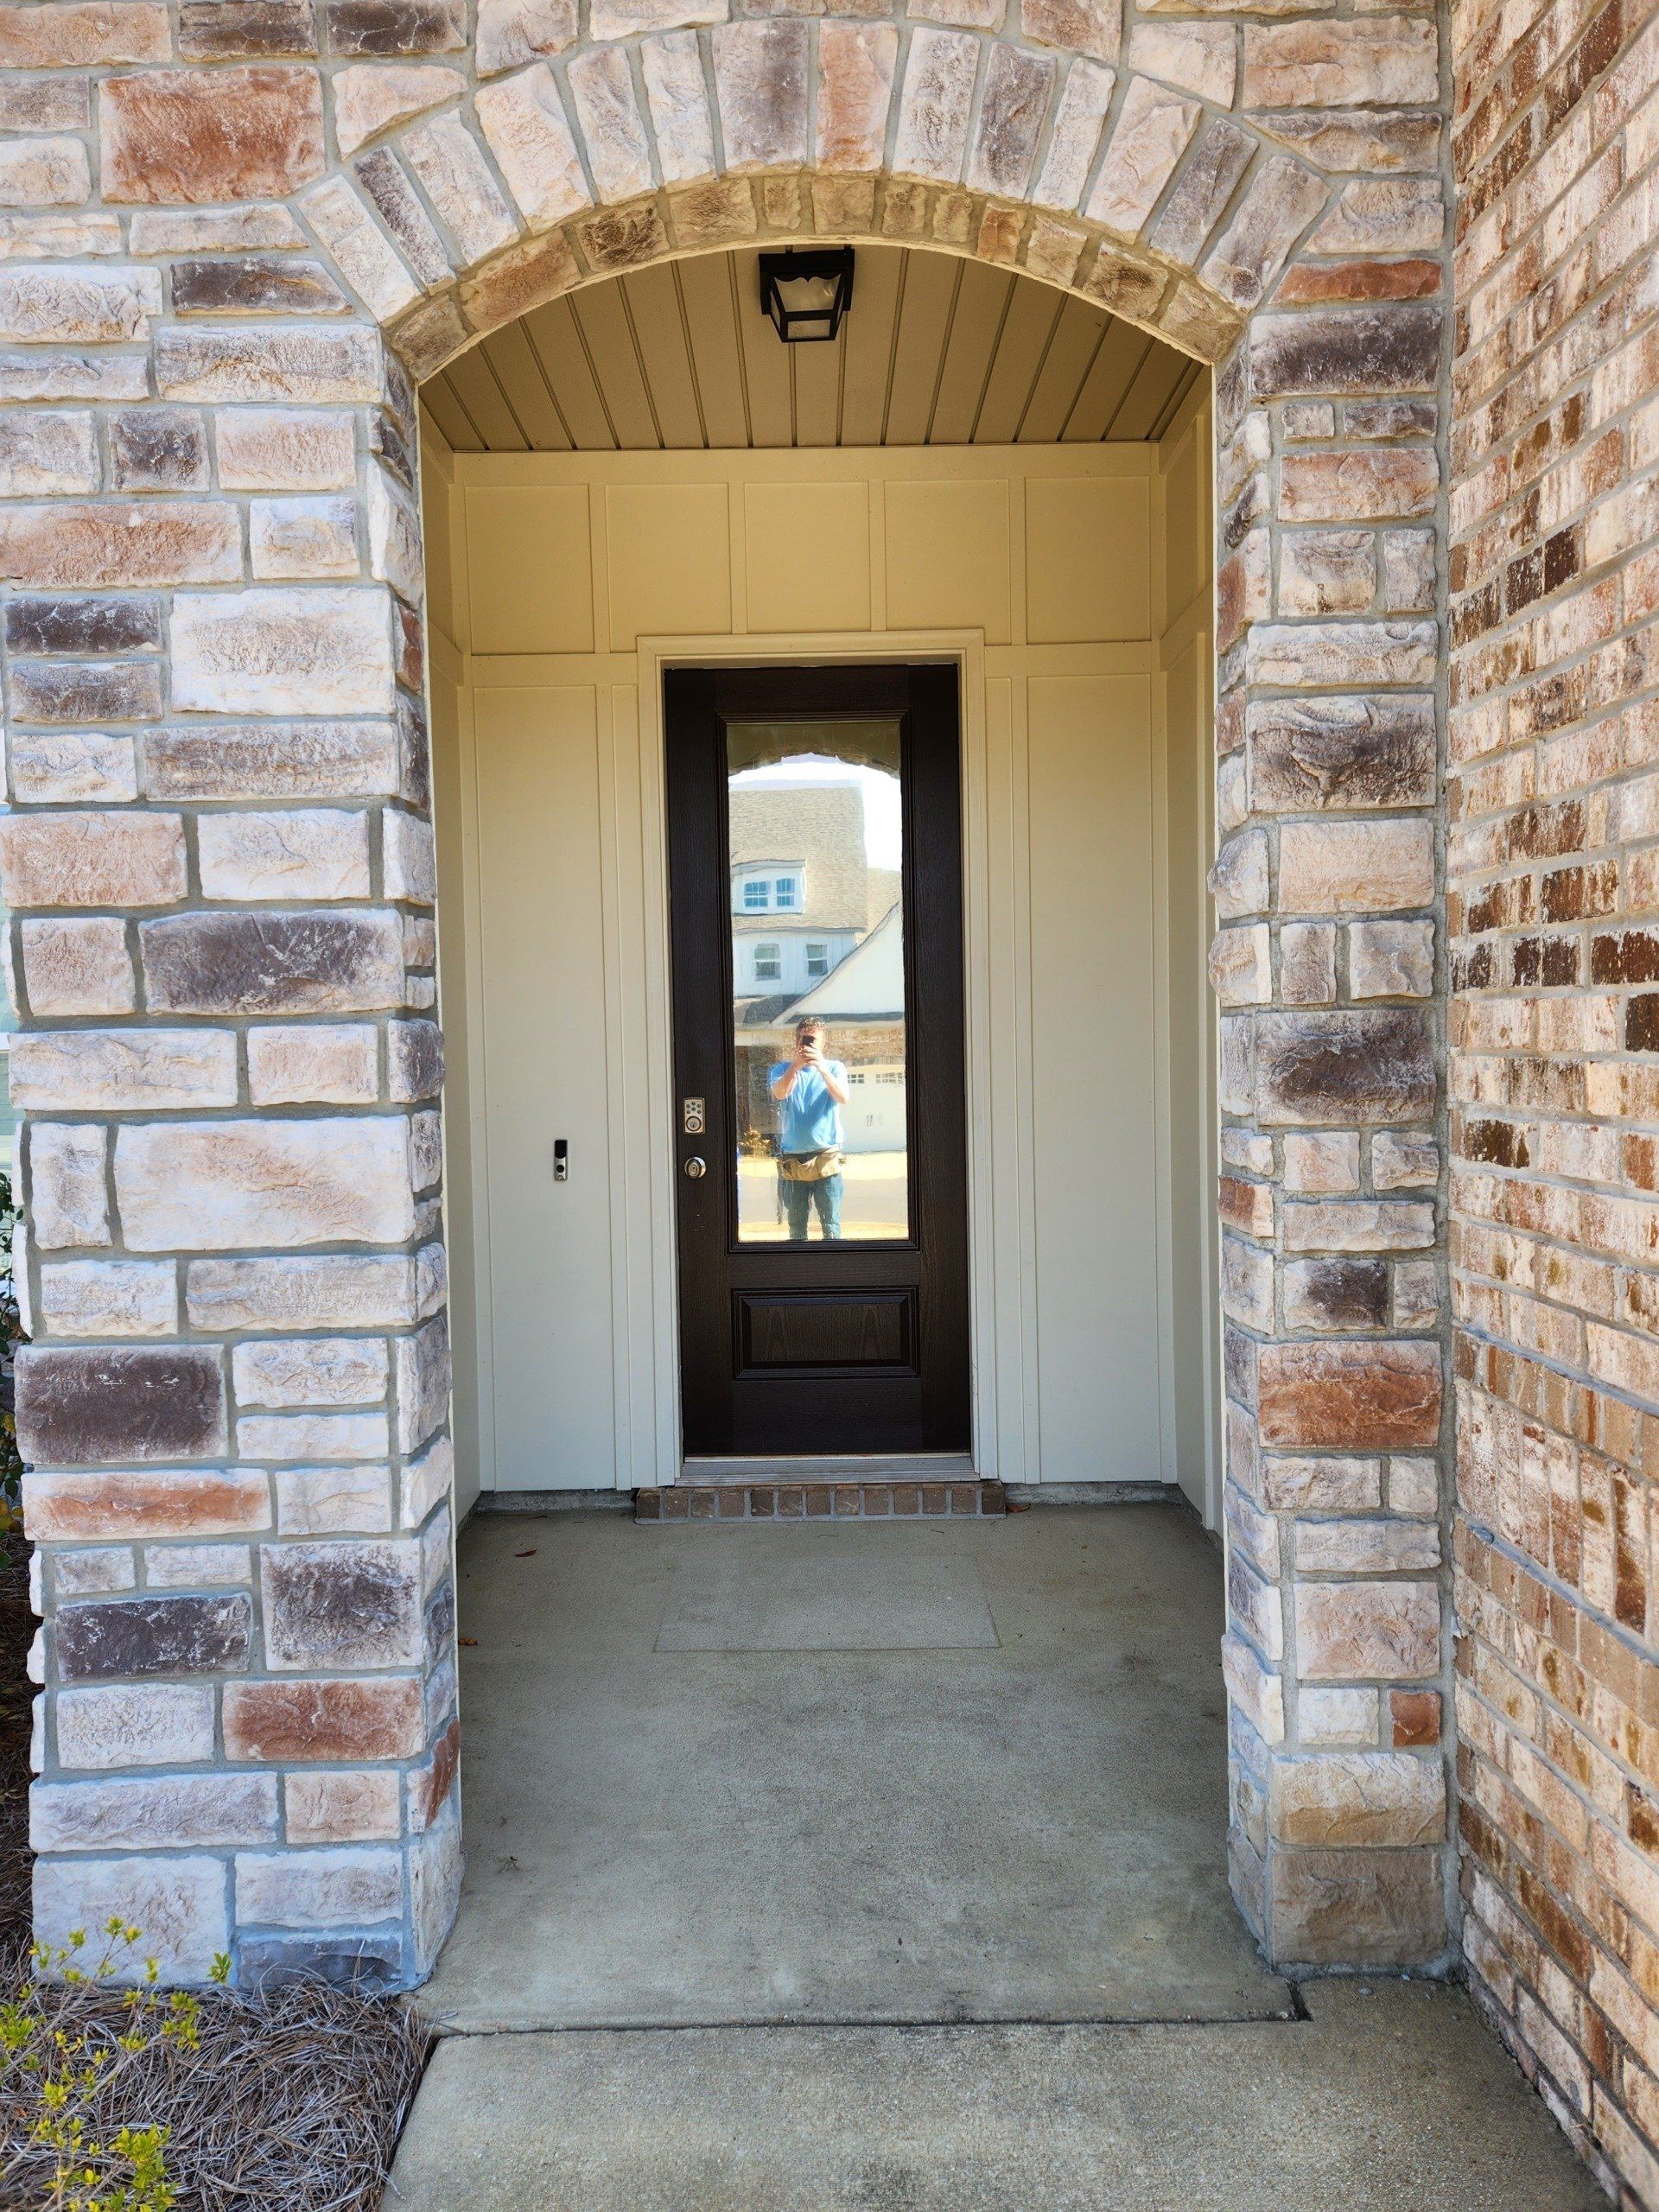 Residential glass door treatment - Privacy achieved. Bright UV-Sun glare distortion was also blocked inside this home with SPF ULTRA tint in Prattville, AL